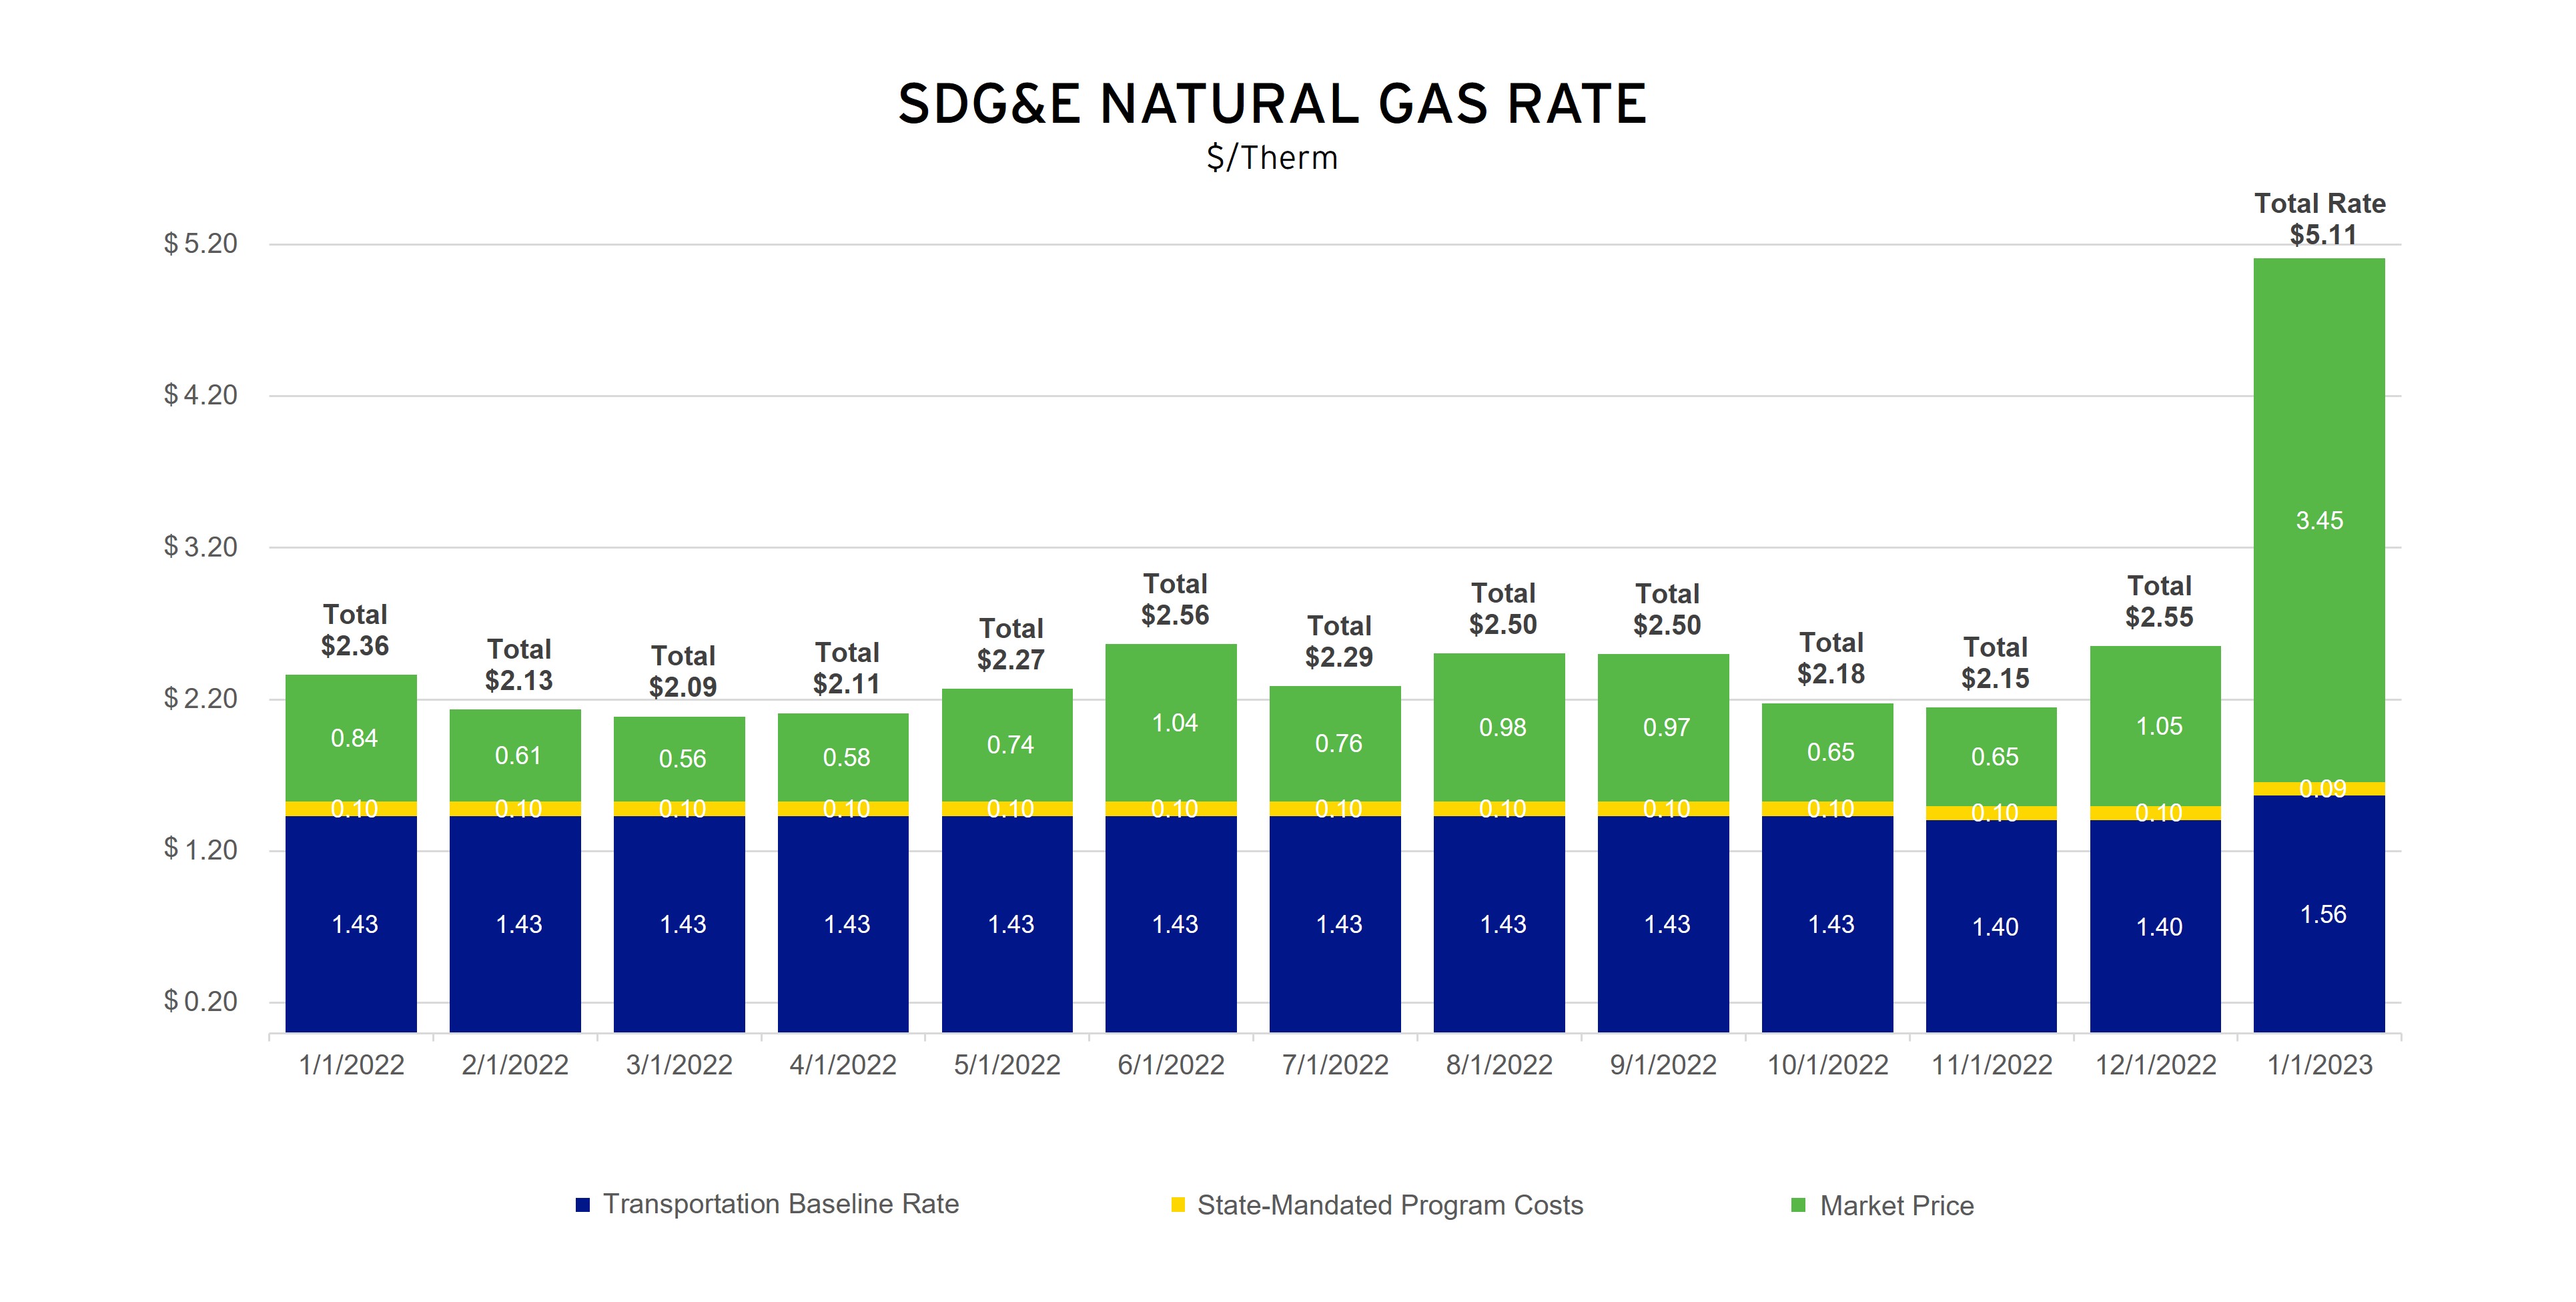 rates-2023-energy-rates-and-who-sets-them-san-diego-gas-electric